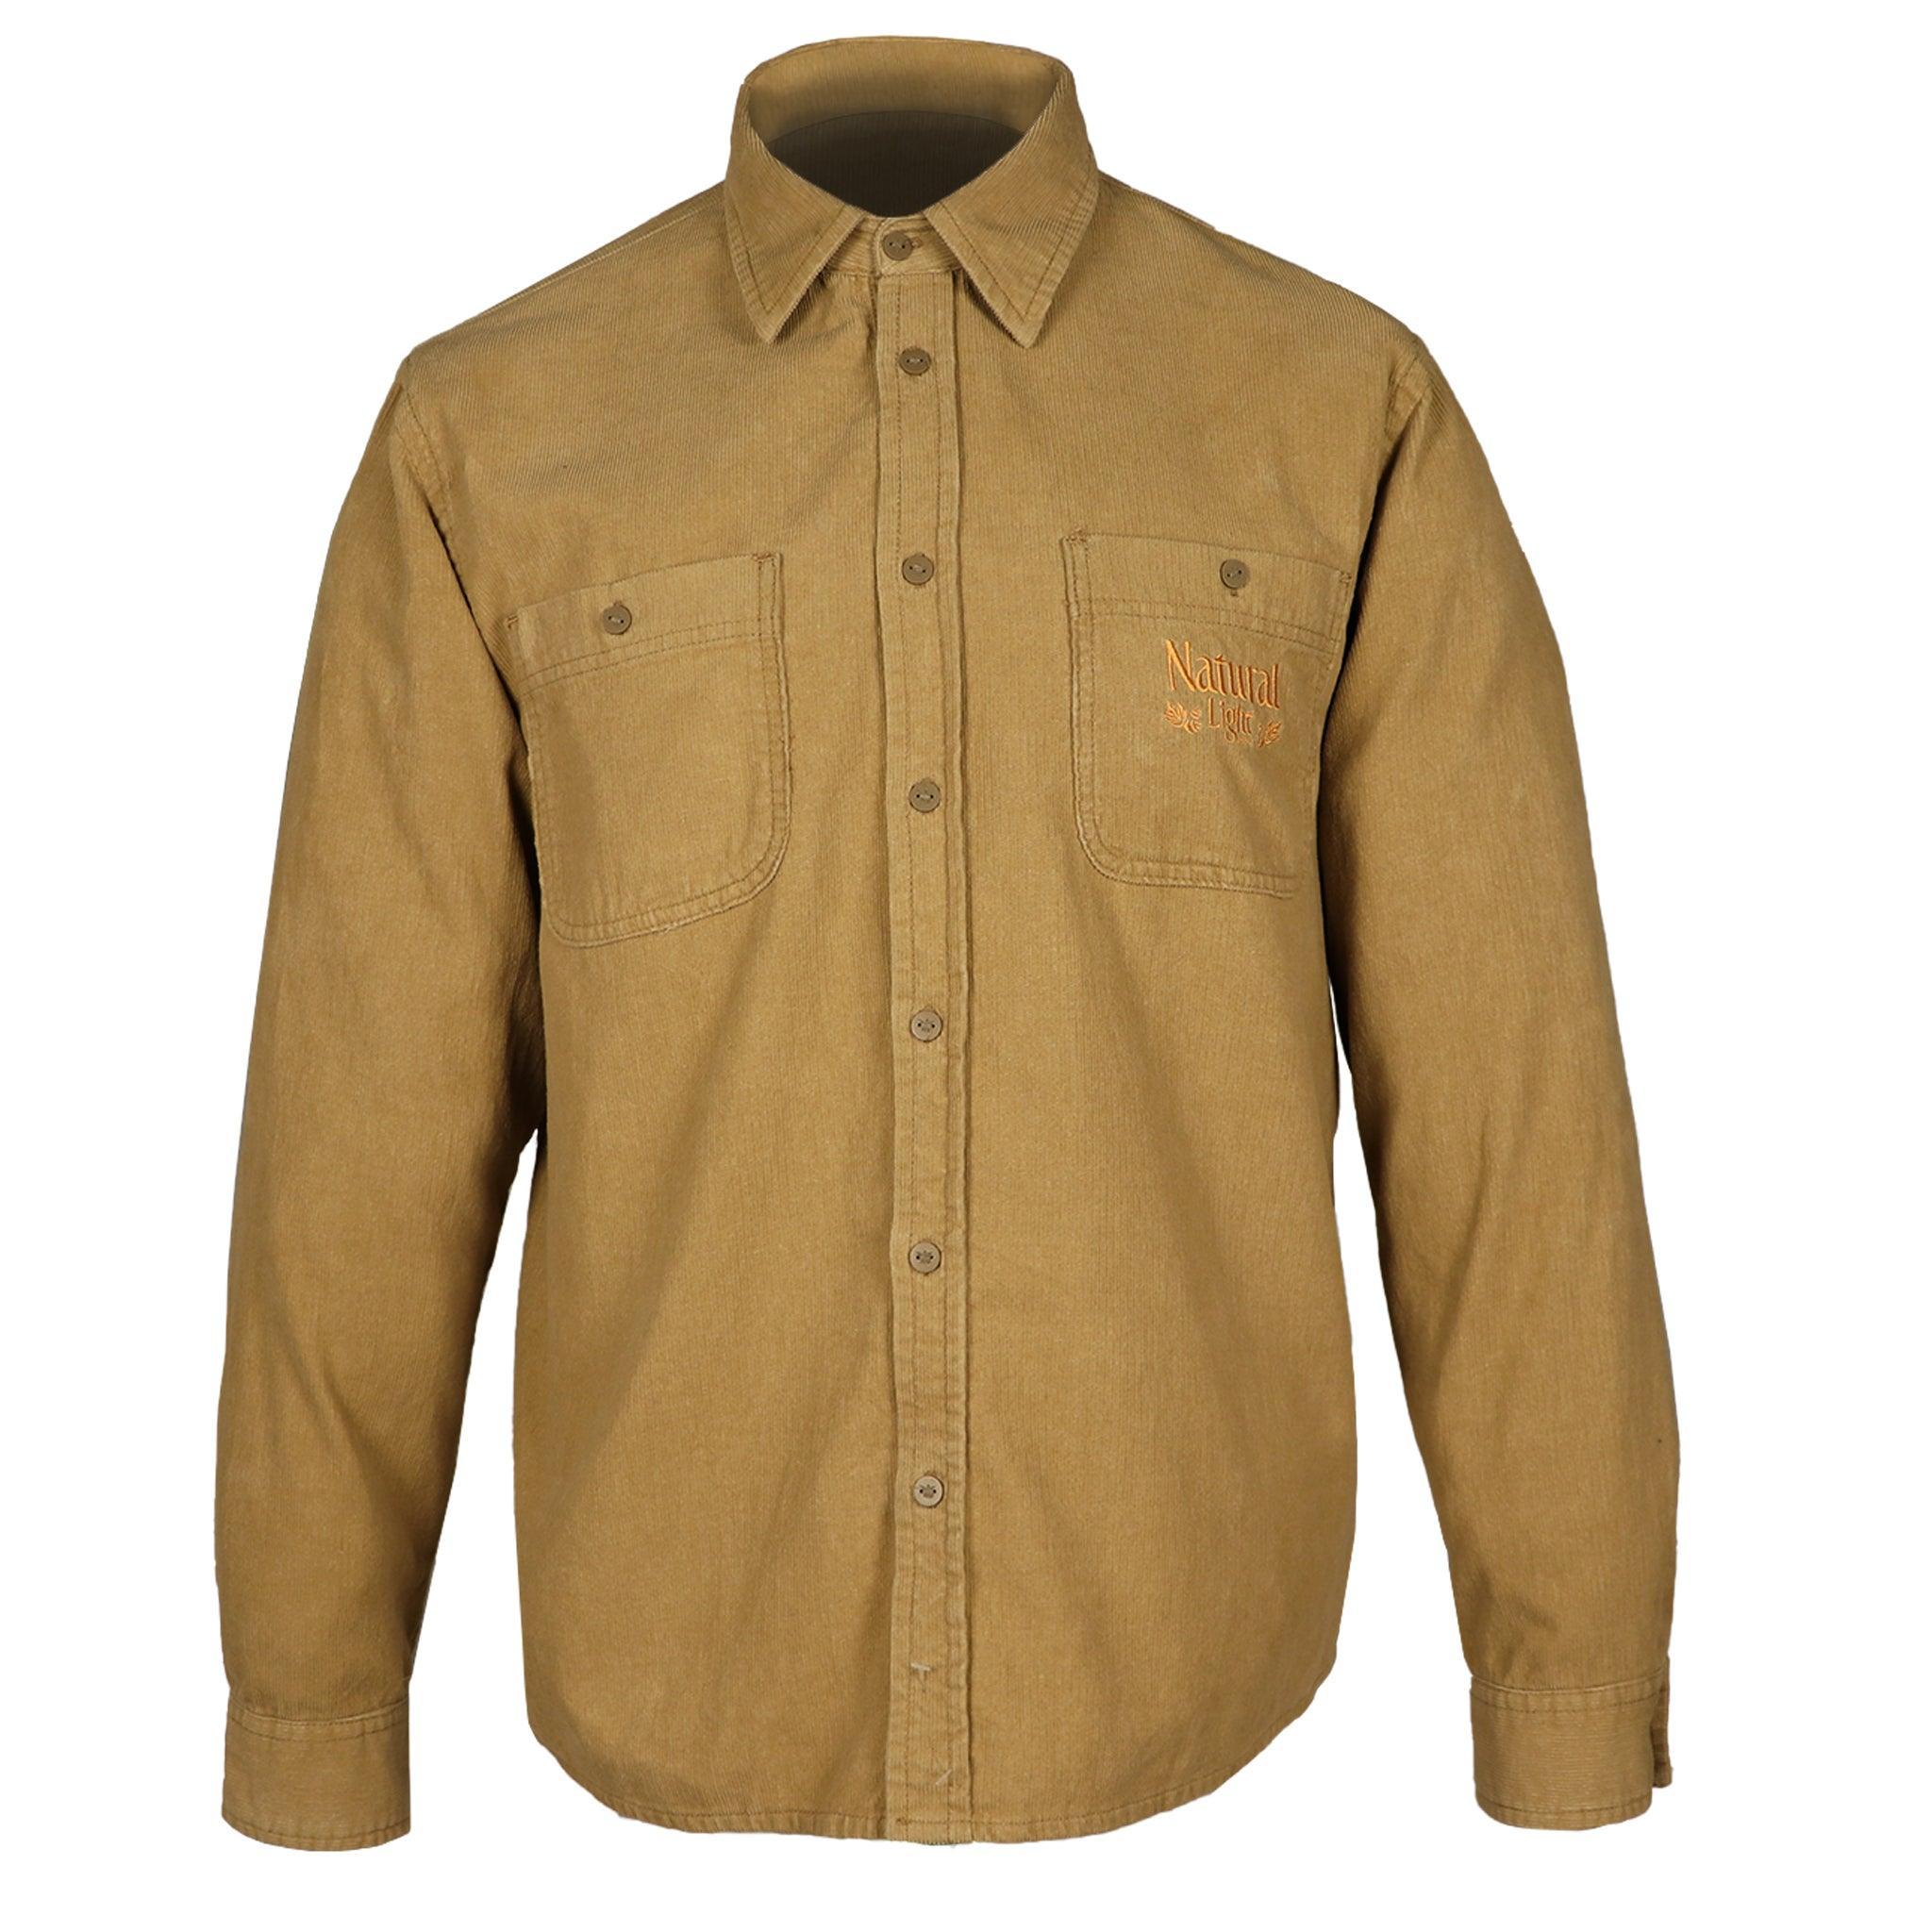 Tan corduroy long sleeve shirt with pockets on left and right chest. Vintage Natural Light logo on left chest pocket.